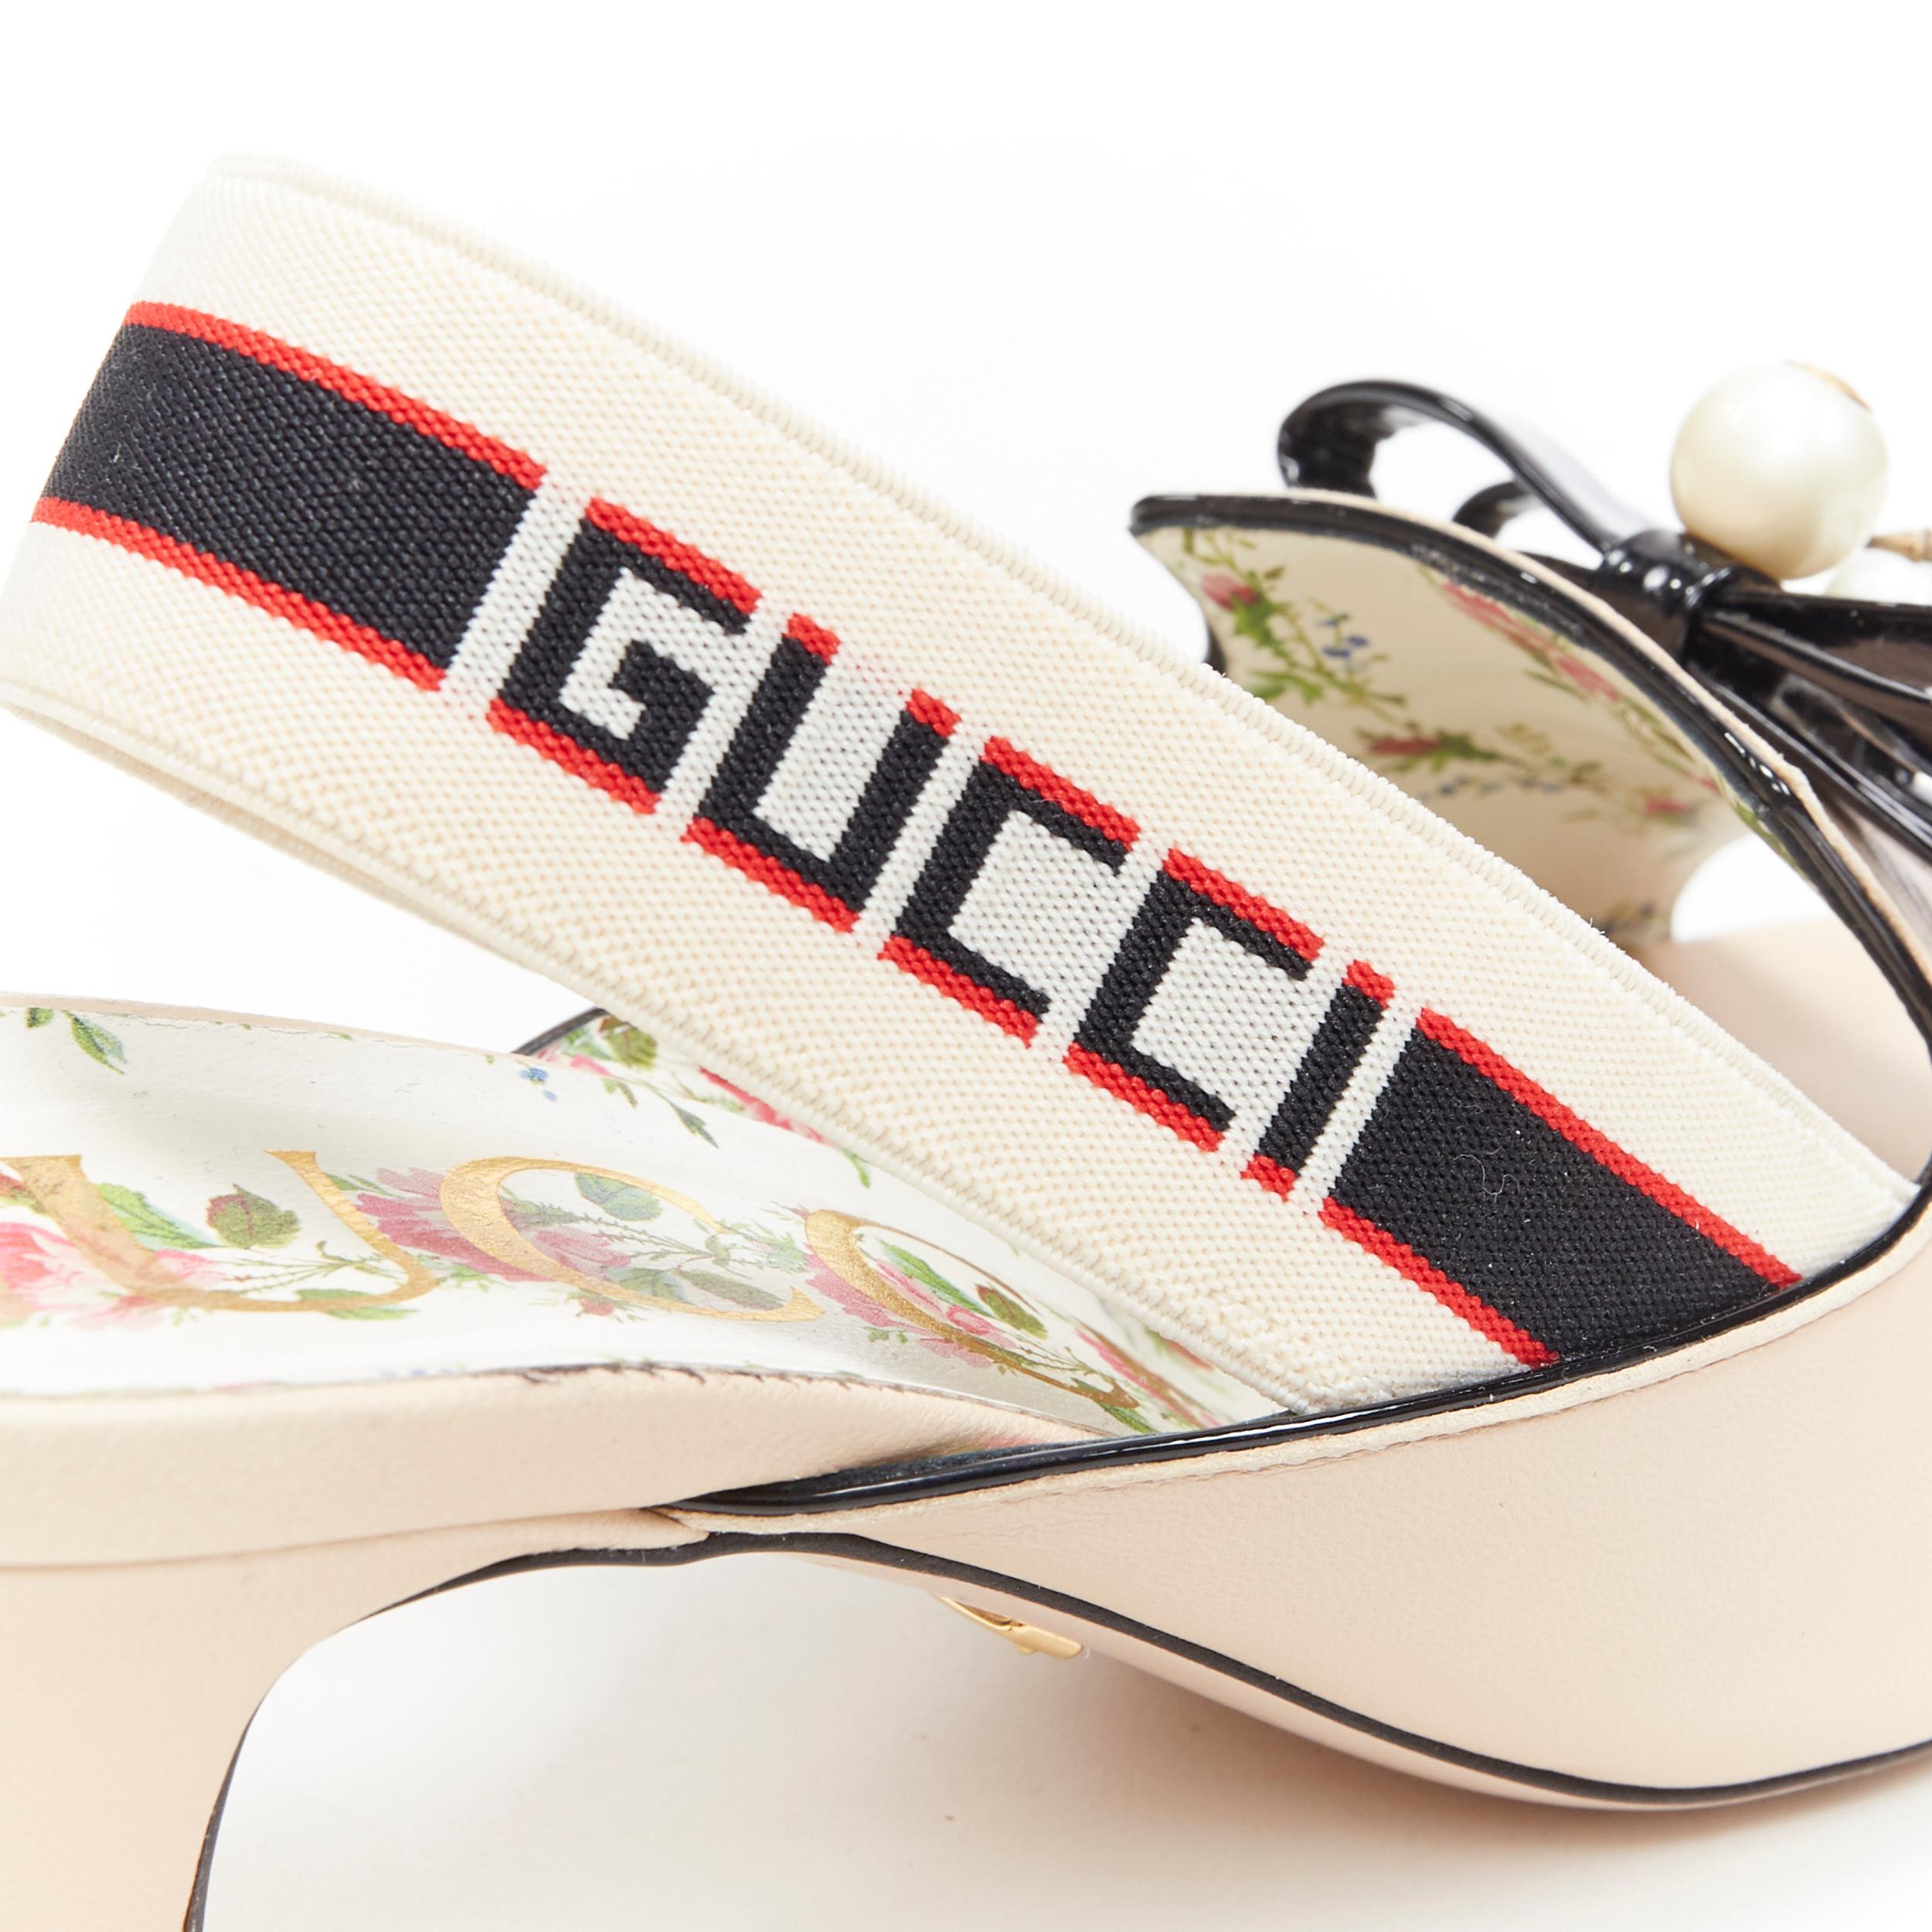 GUCCI MICHELE nude GG pearl patent bow open toe logo slingback heel EU36.5
Brand: Gucci
Designer: Alessandro Michele
Model Name / Style: Slingback pump
Material: Leather
Color: Beige
Pattern: Solid
Closure: Sling back
Lining material: Leather
Extra